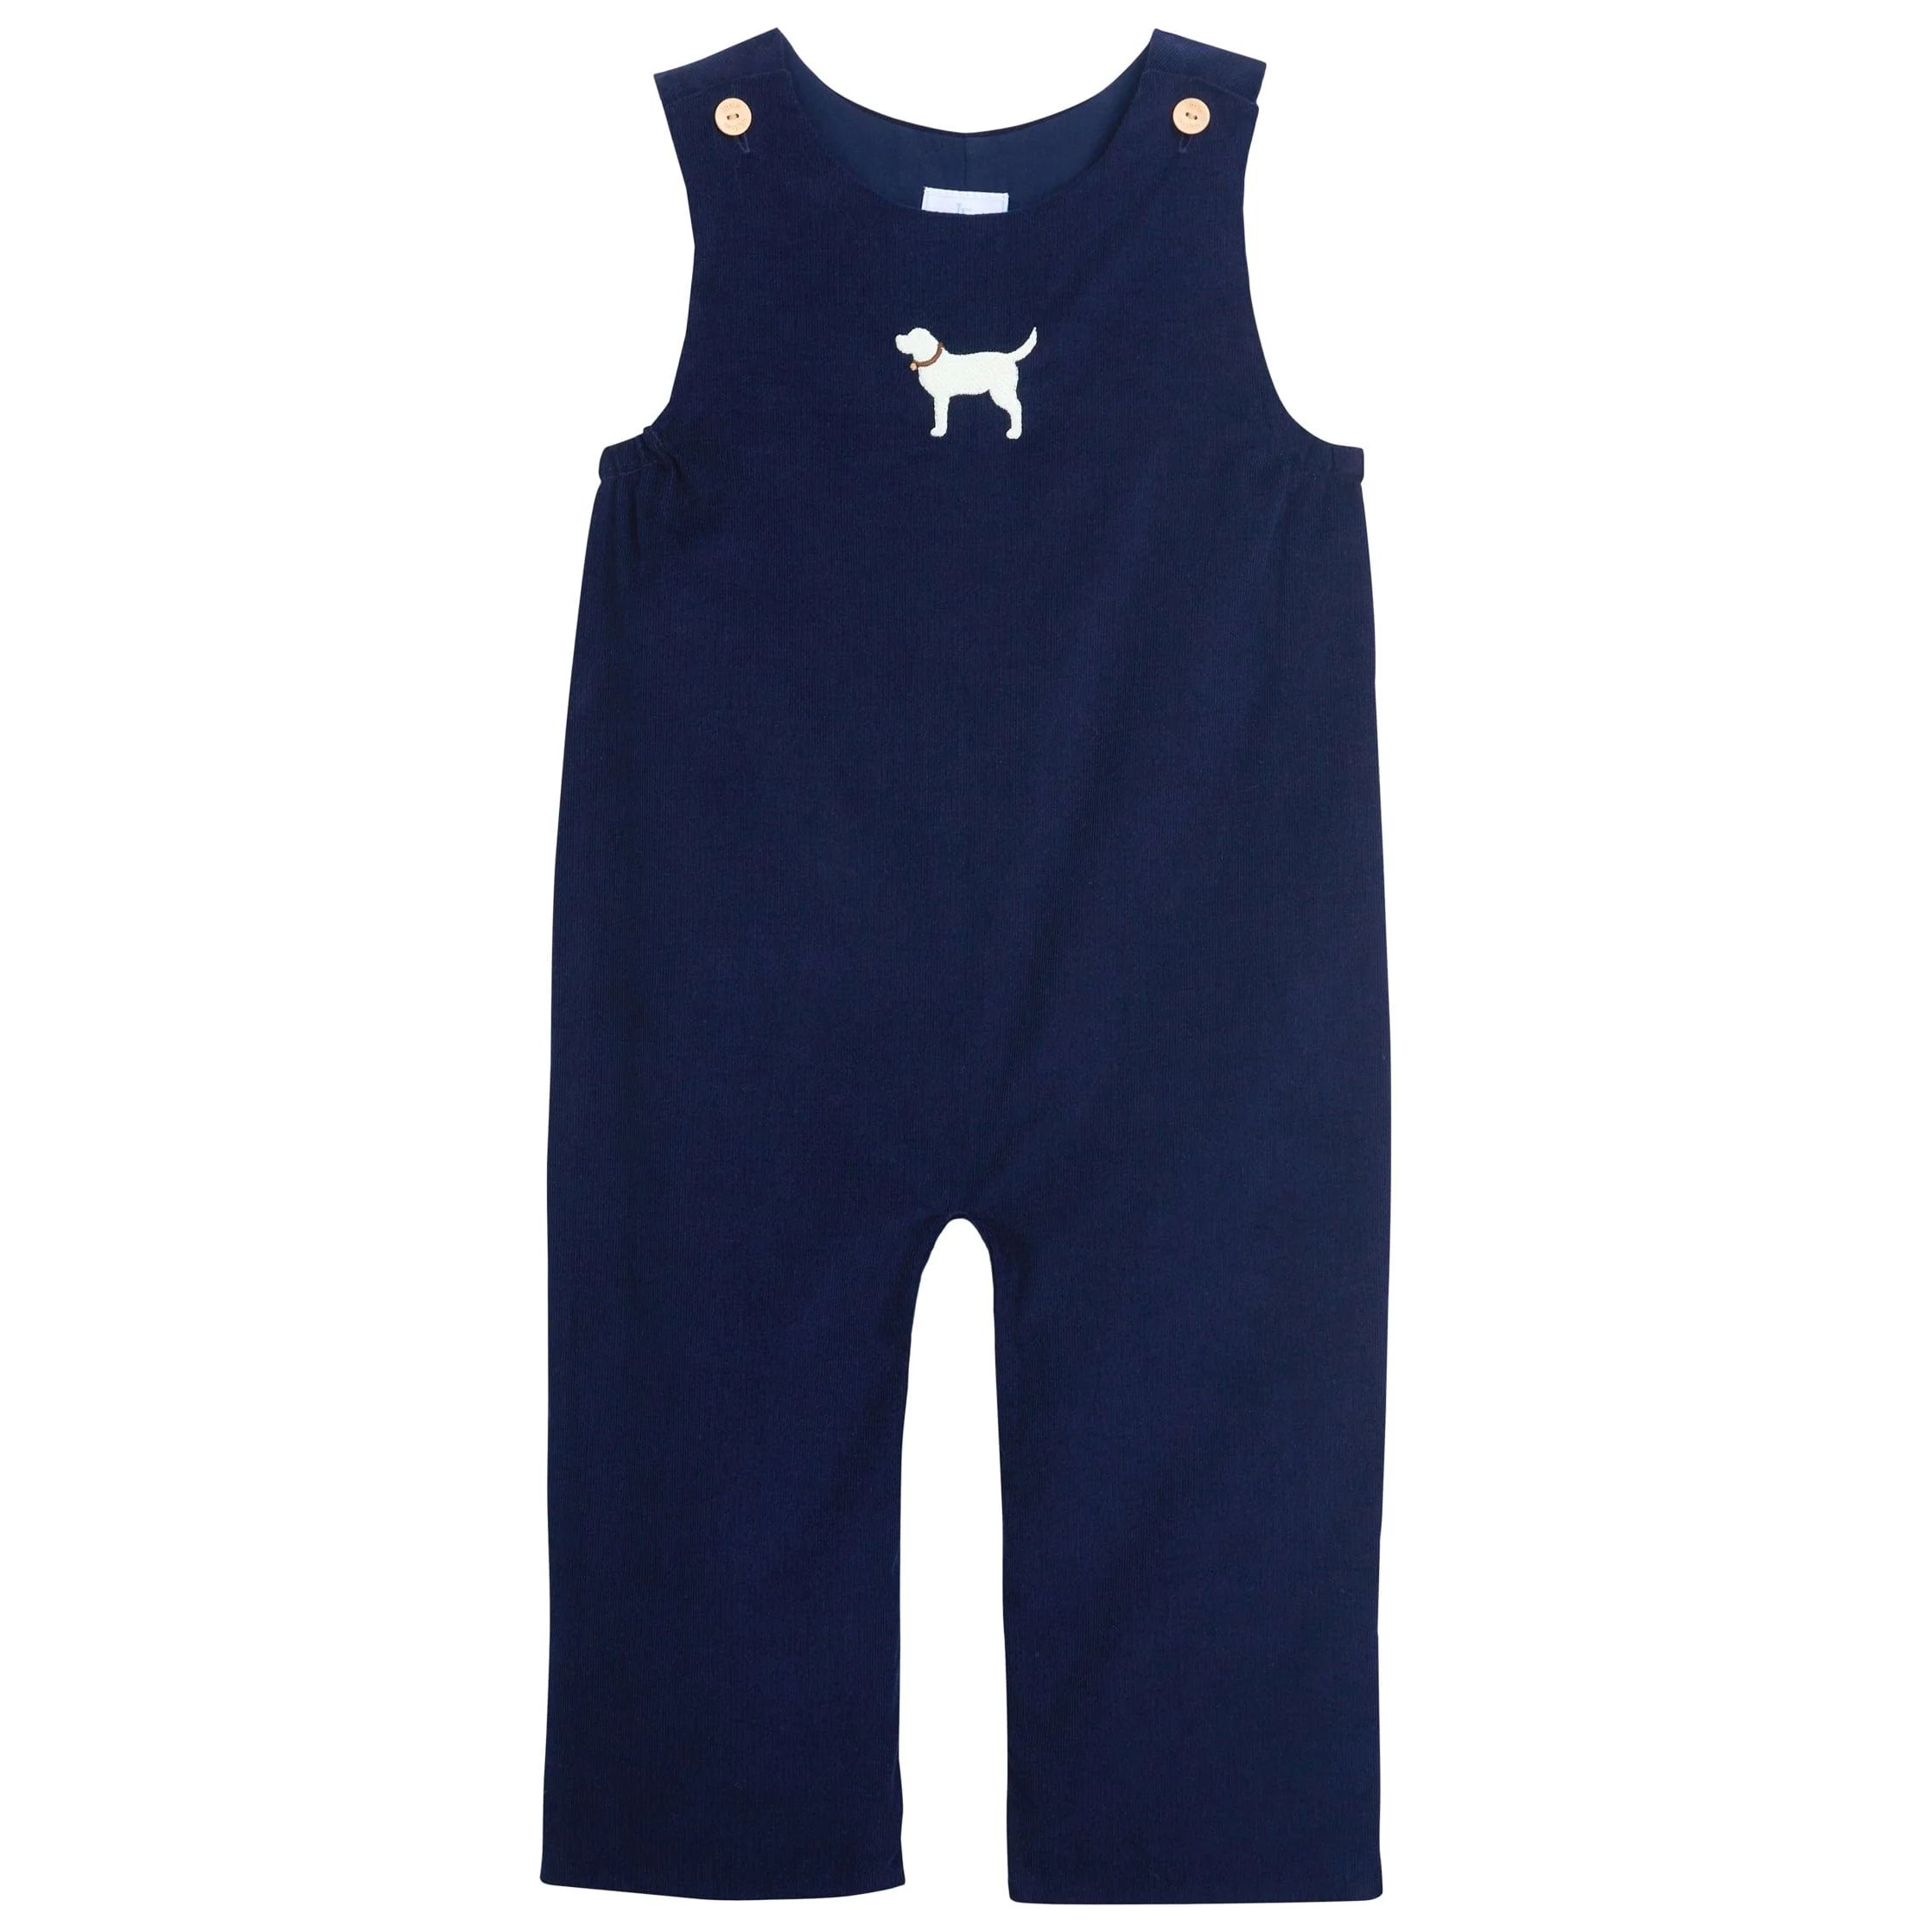 Toddler Lab Campbell Overall - Little Boy's Outfit | Little English